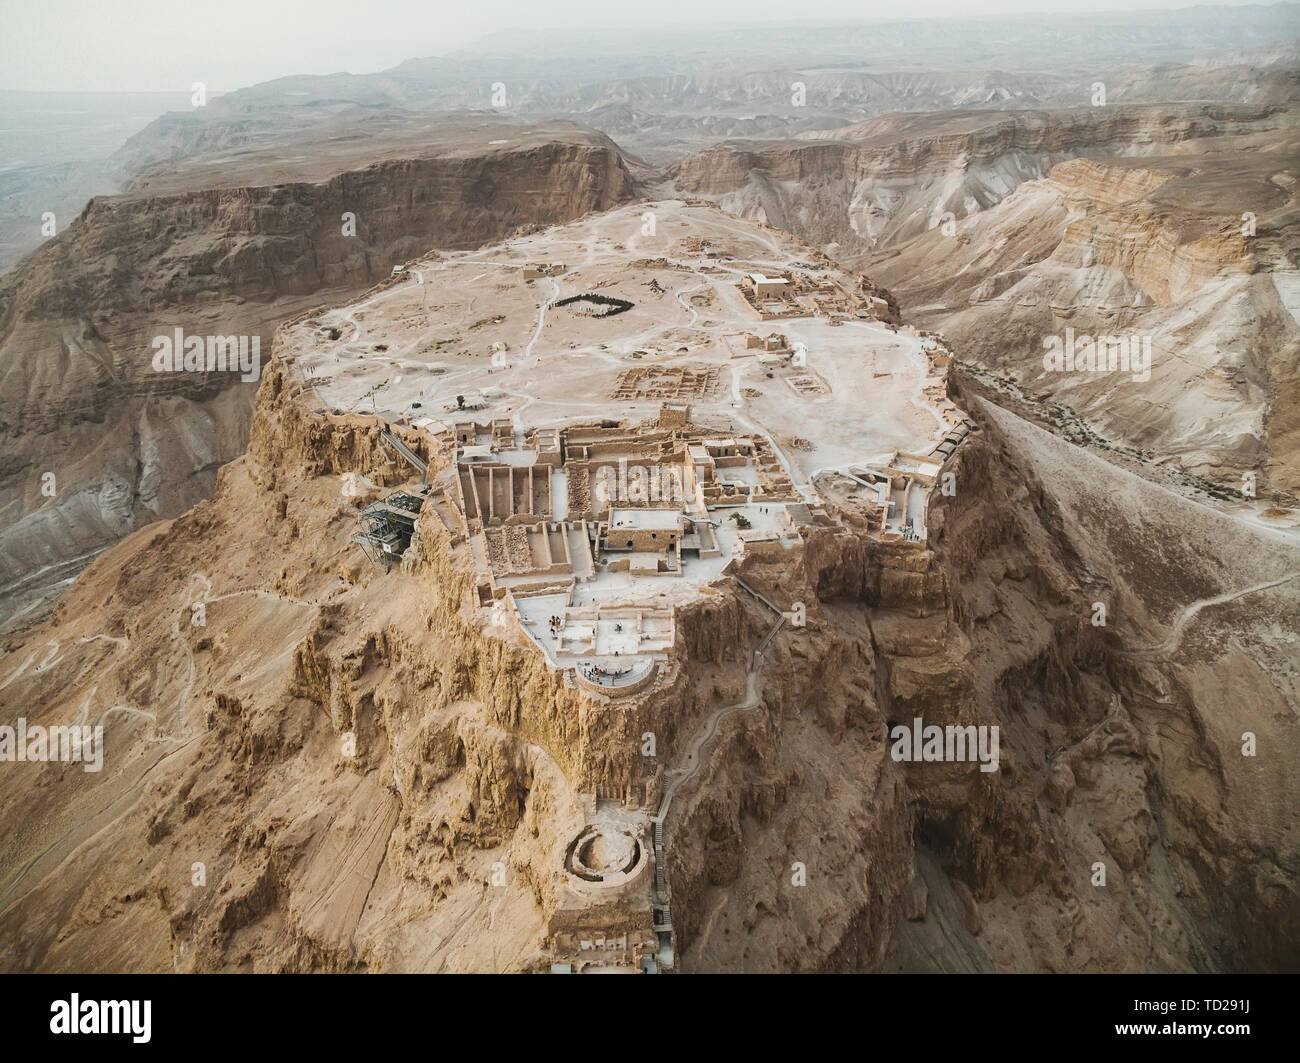 Aerial view of Masada fortress area, ancient fortification in the Southern District of Israel situated on top of isolated rock plateau, akin to a mesa Stock Photo